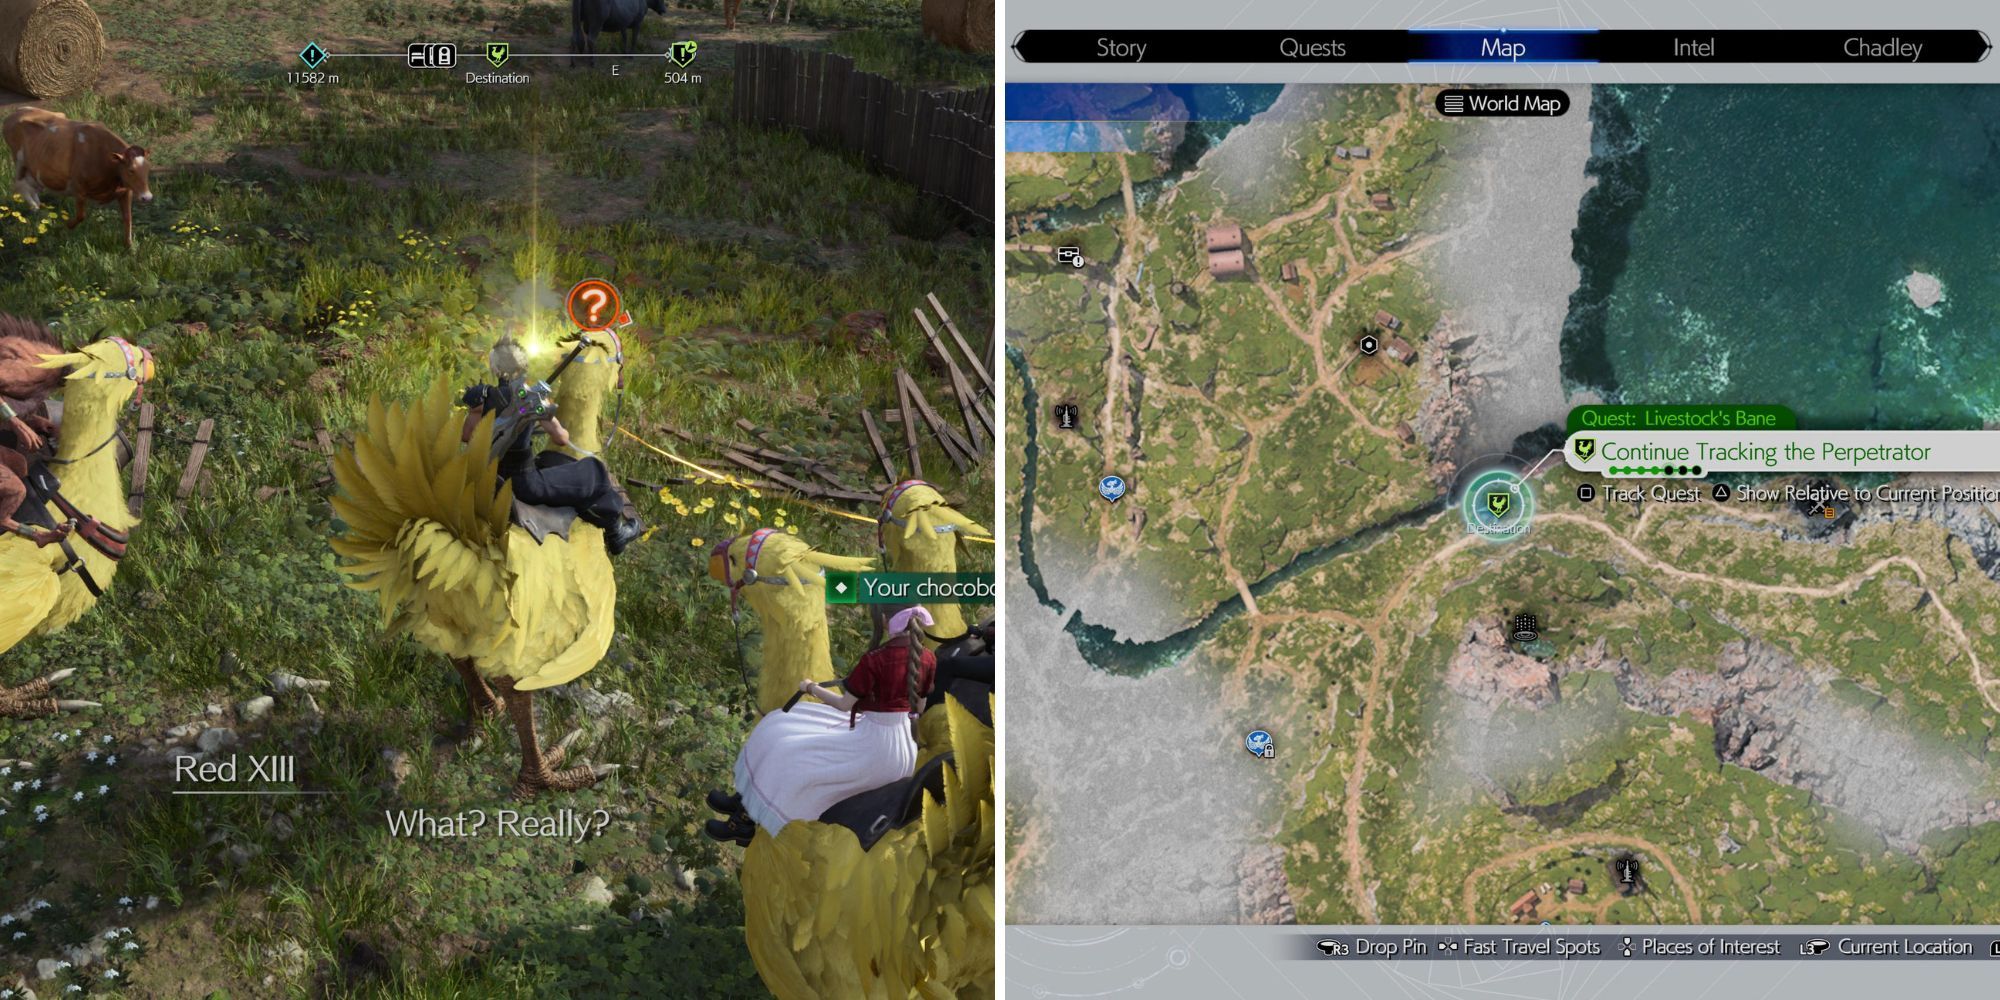 The Chocobo Tracking A Scent & The Location On The Map 